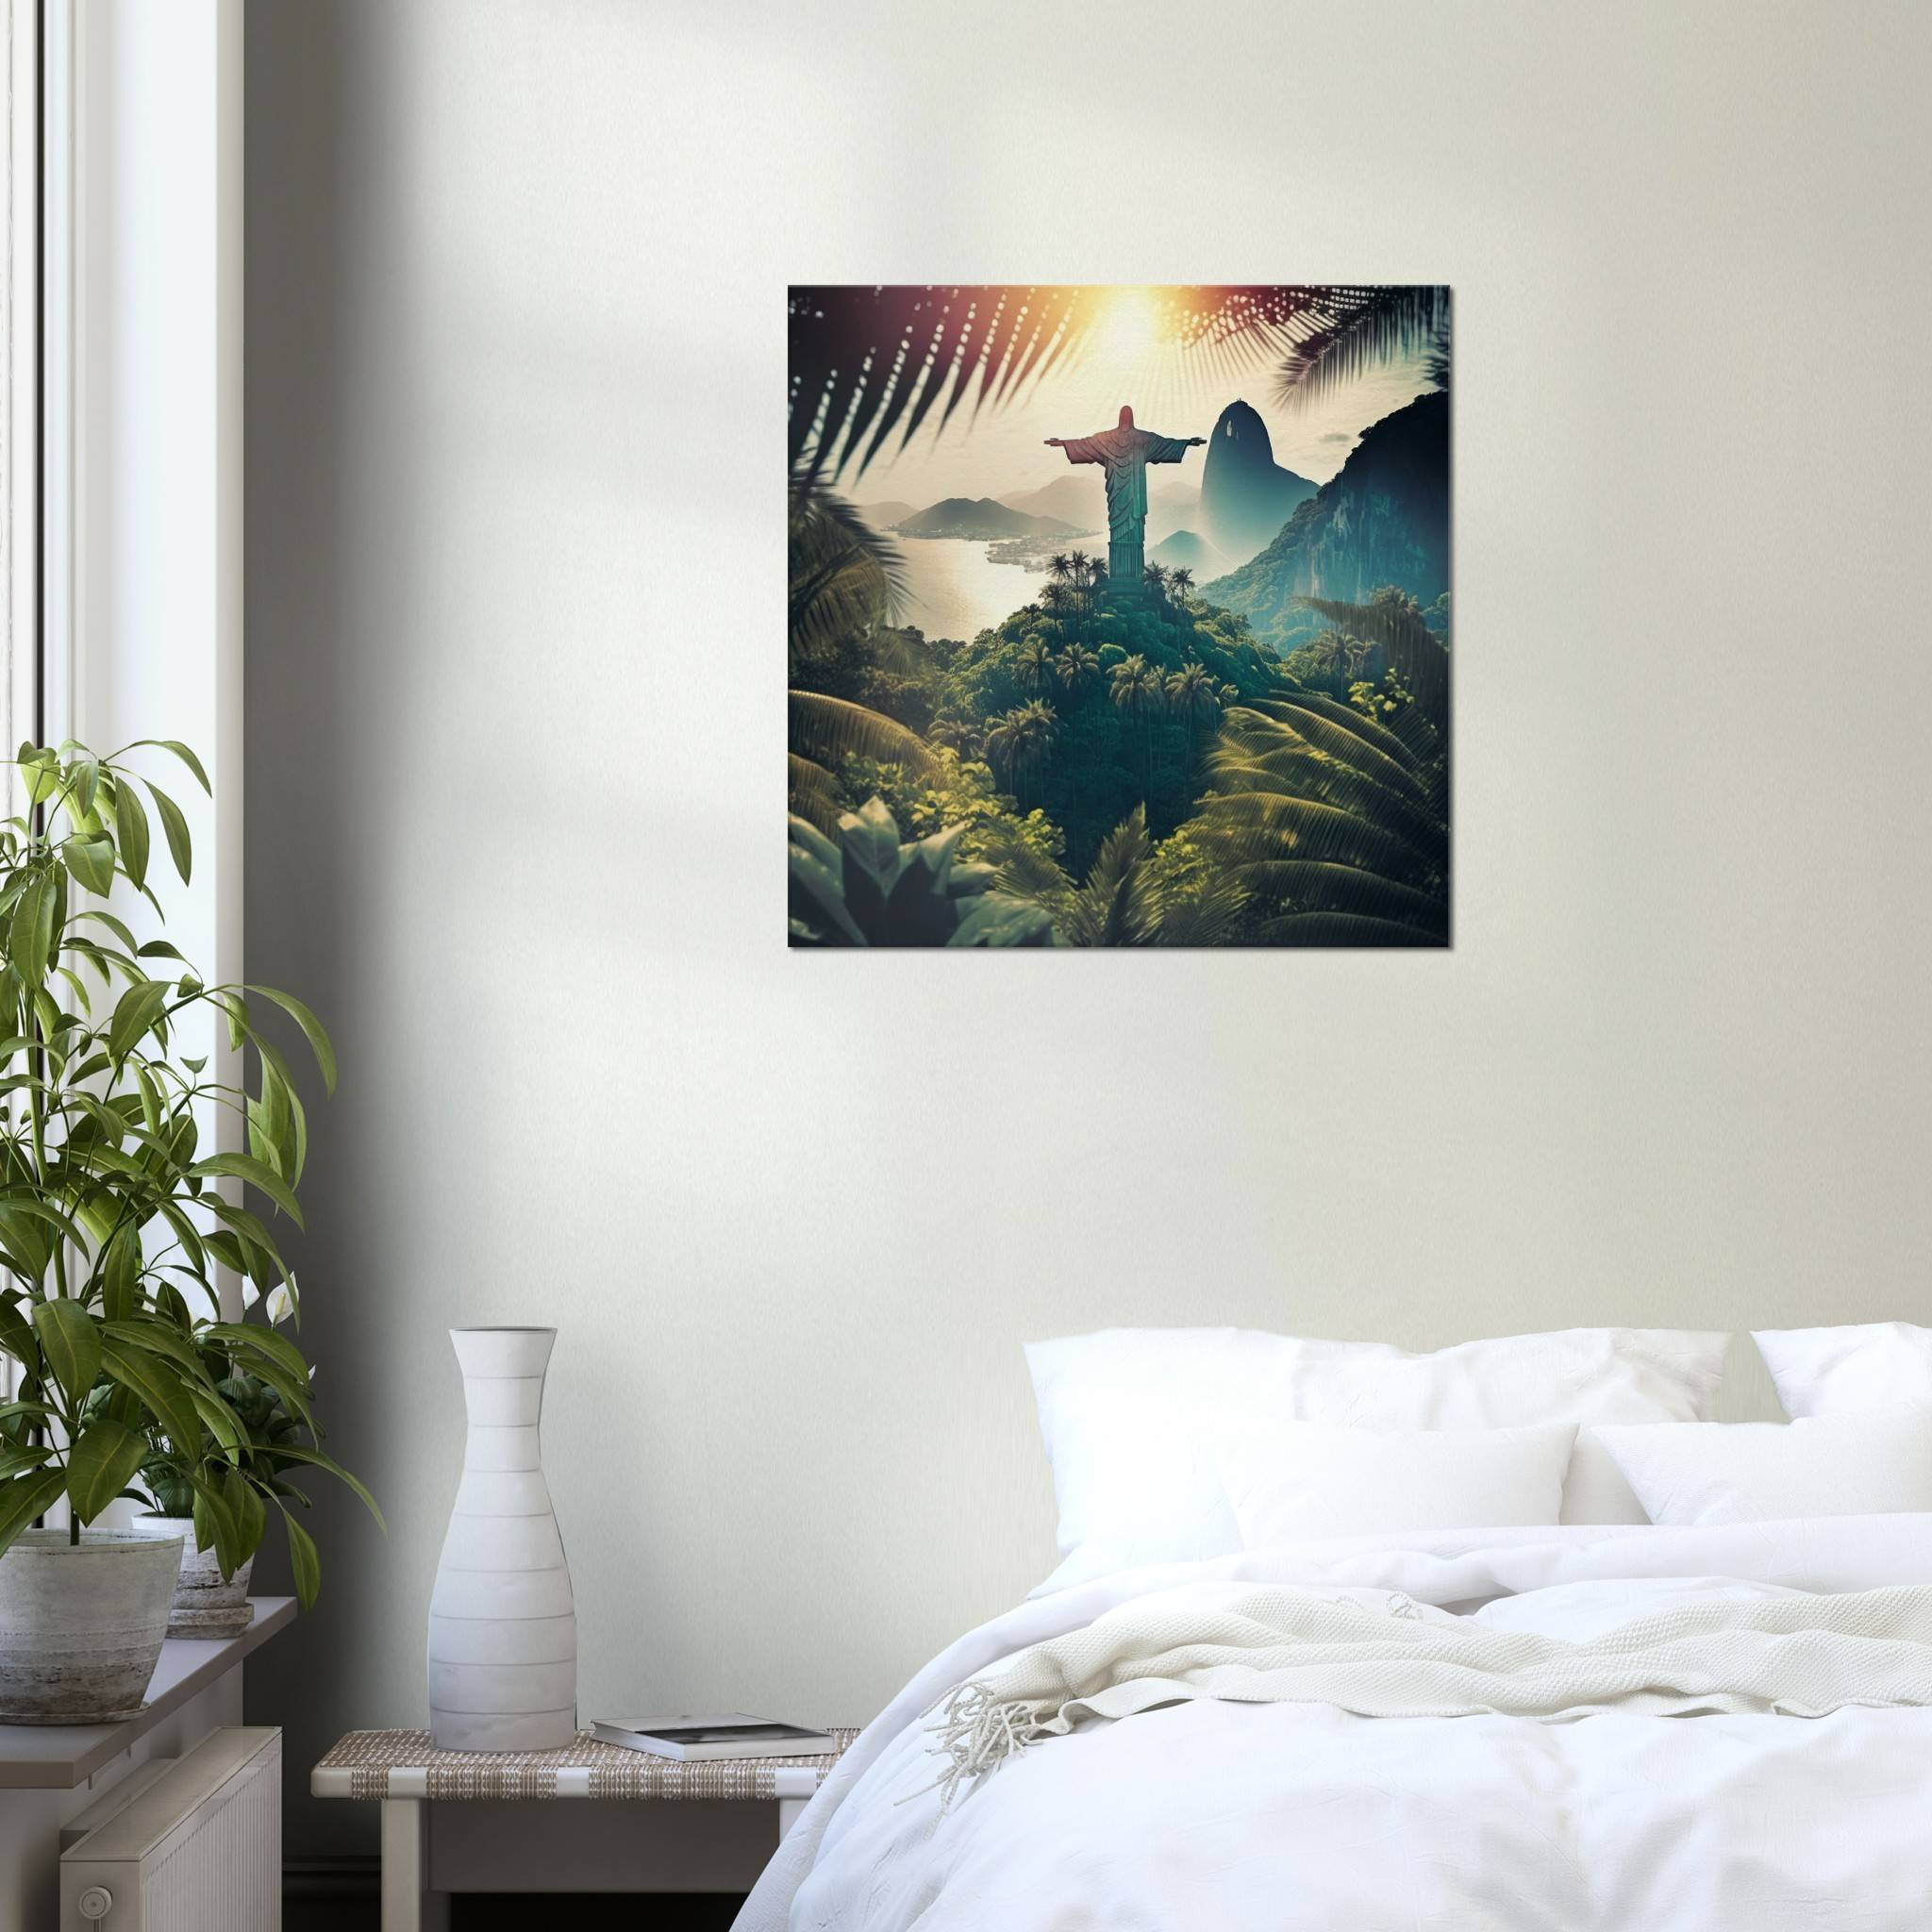 Christ the Redeemer 6 / 60 x 60cm (Canvas Print) Canvas Print Canvas reproduction The Pianist Print On Demand Fabled Gallery https://fabledgallery.art/product/christ-the-redeemer-6-60-x-60cm-canvas-print/